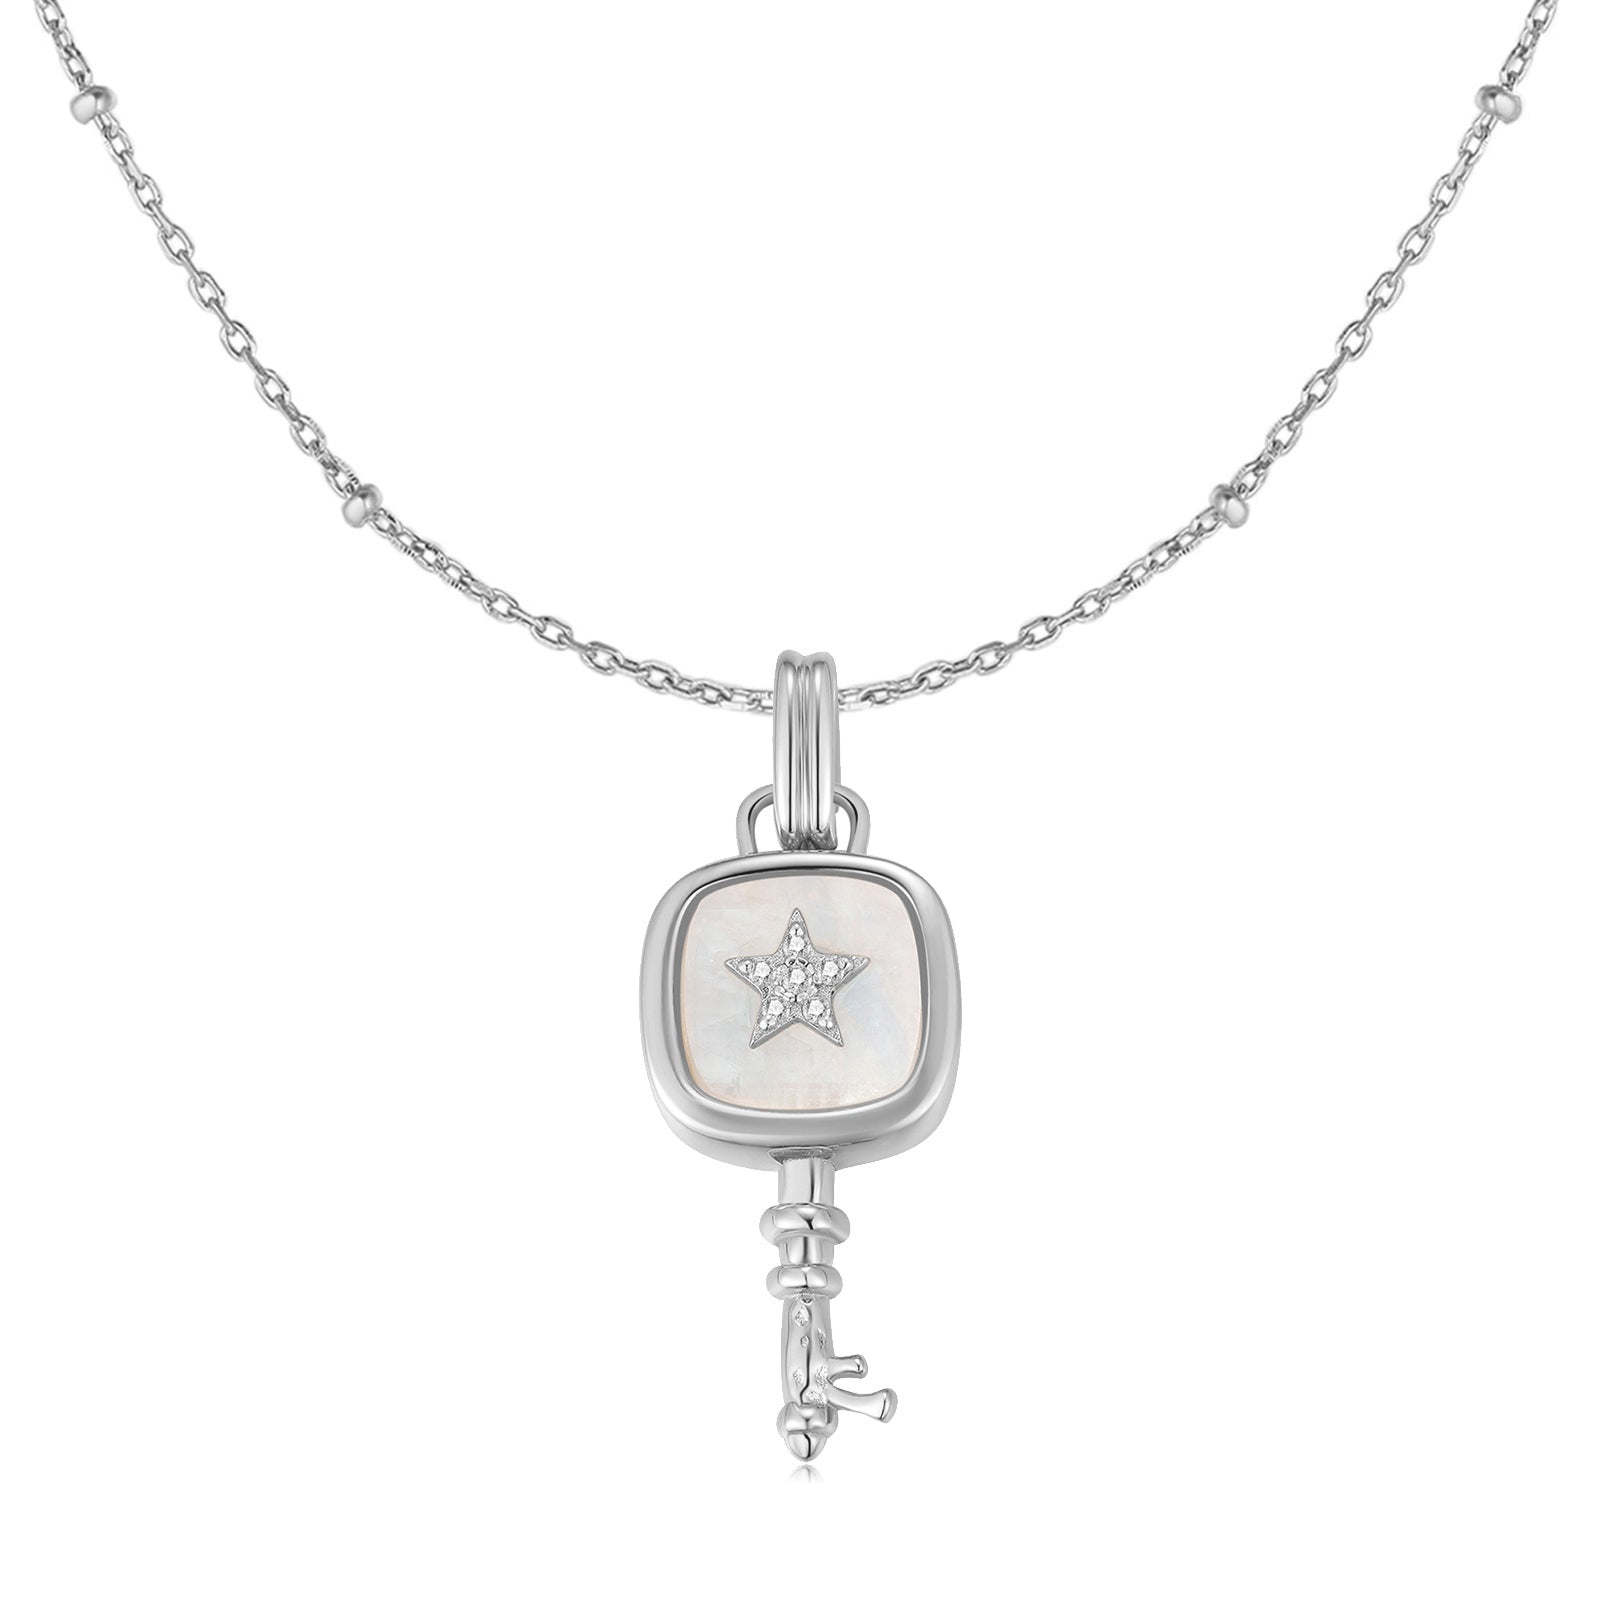 Moonstone Silver Key Necklace - Wanderer | LOVE BY THE MOON